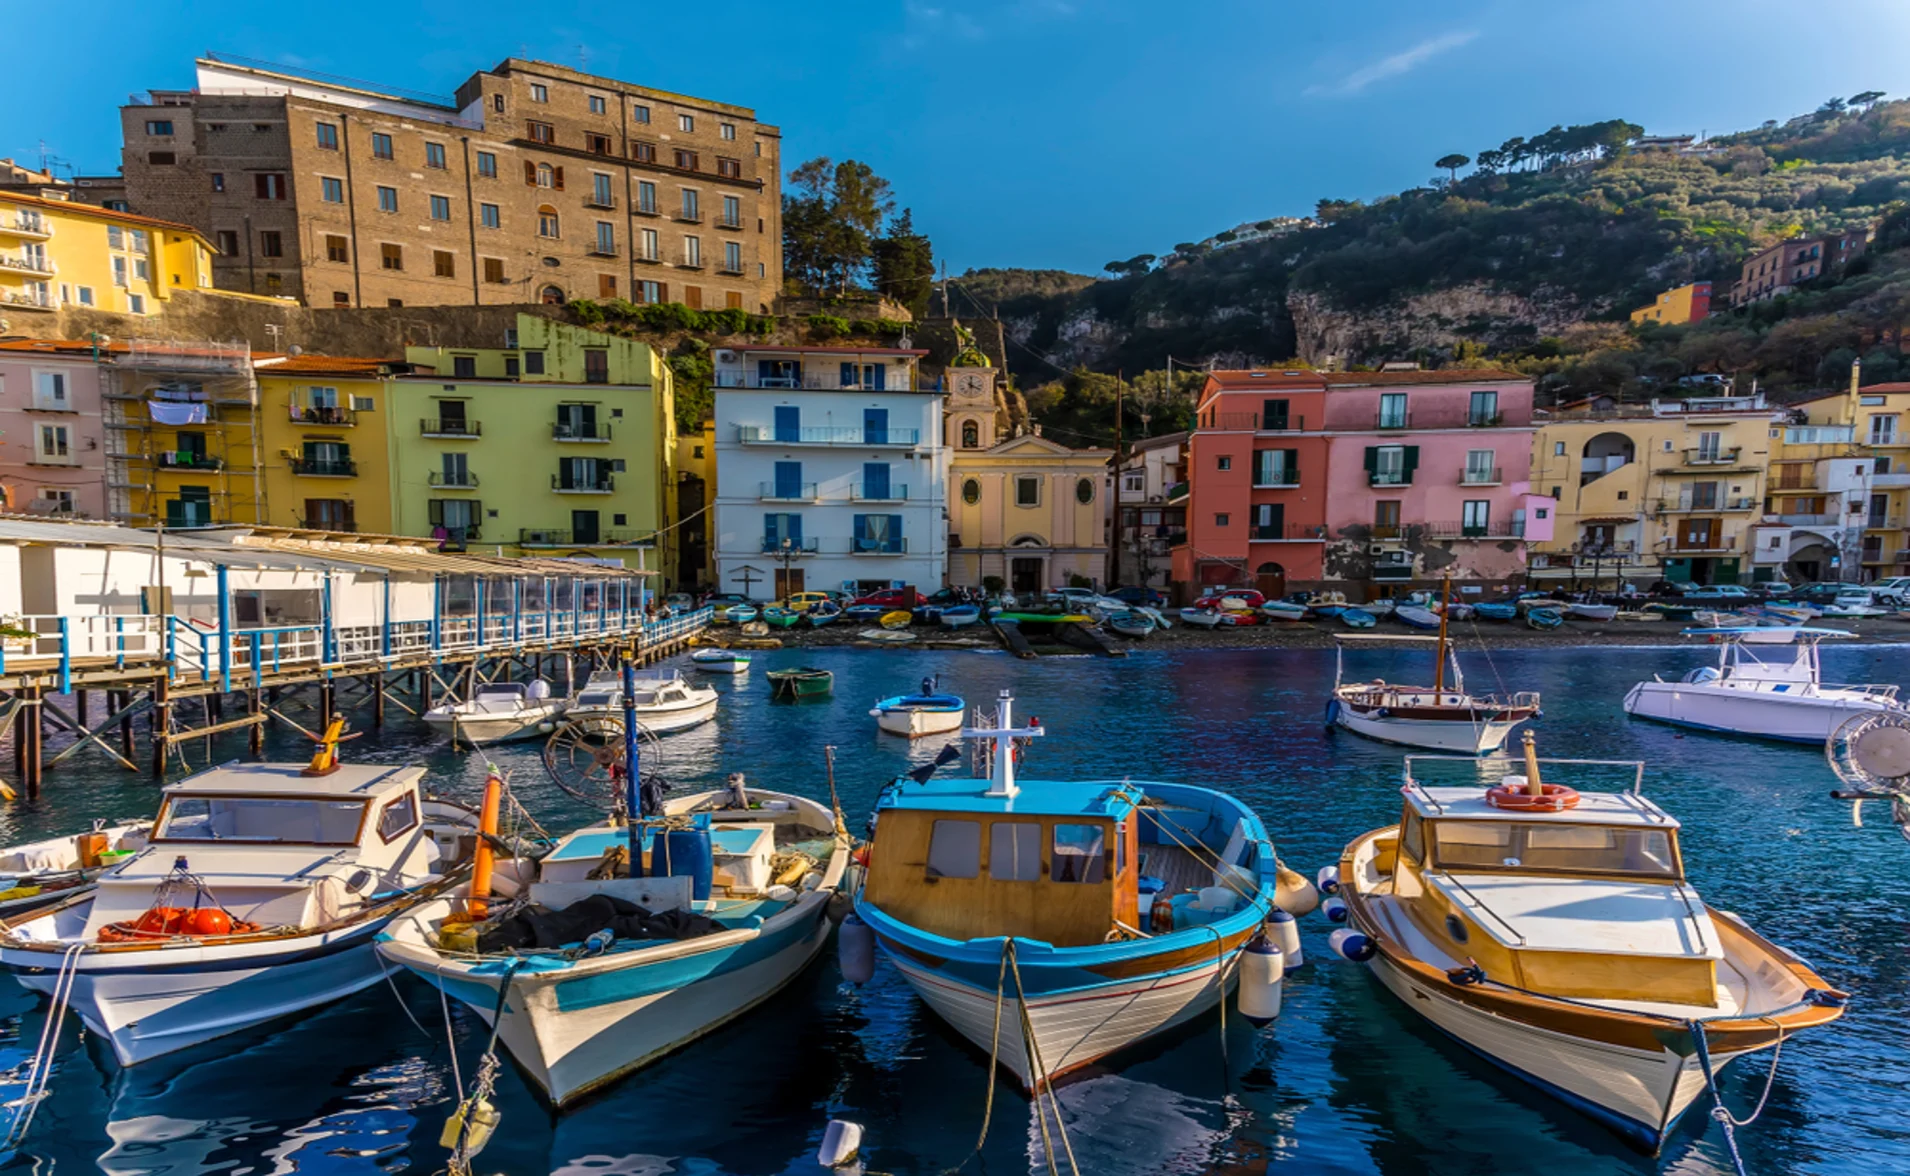 boats in a marina and colorful houses in sorrento italy 